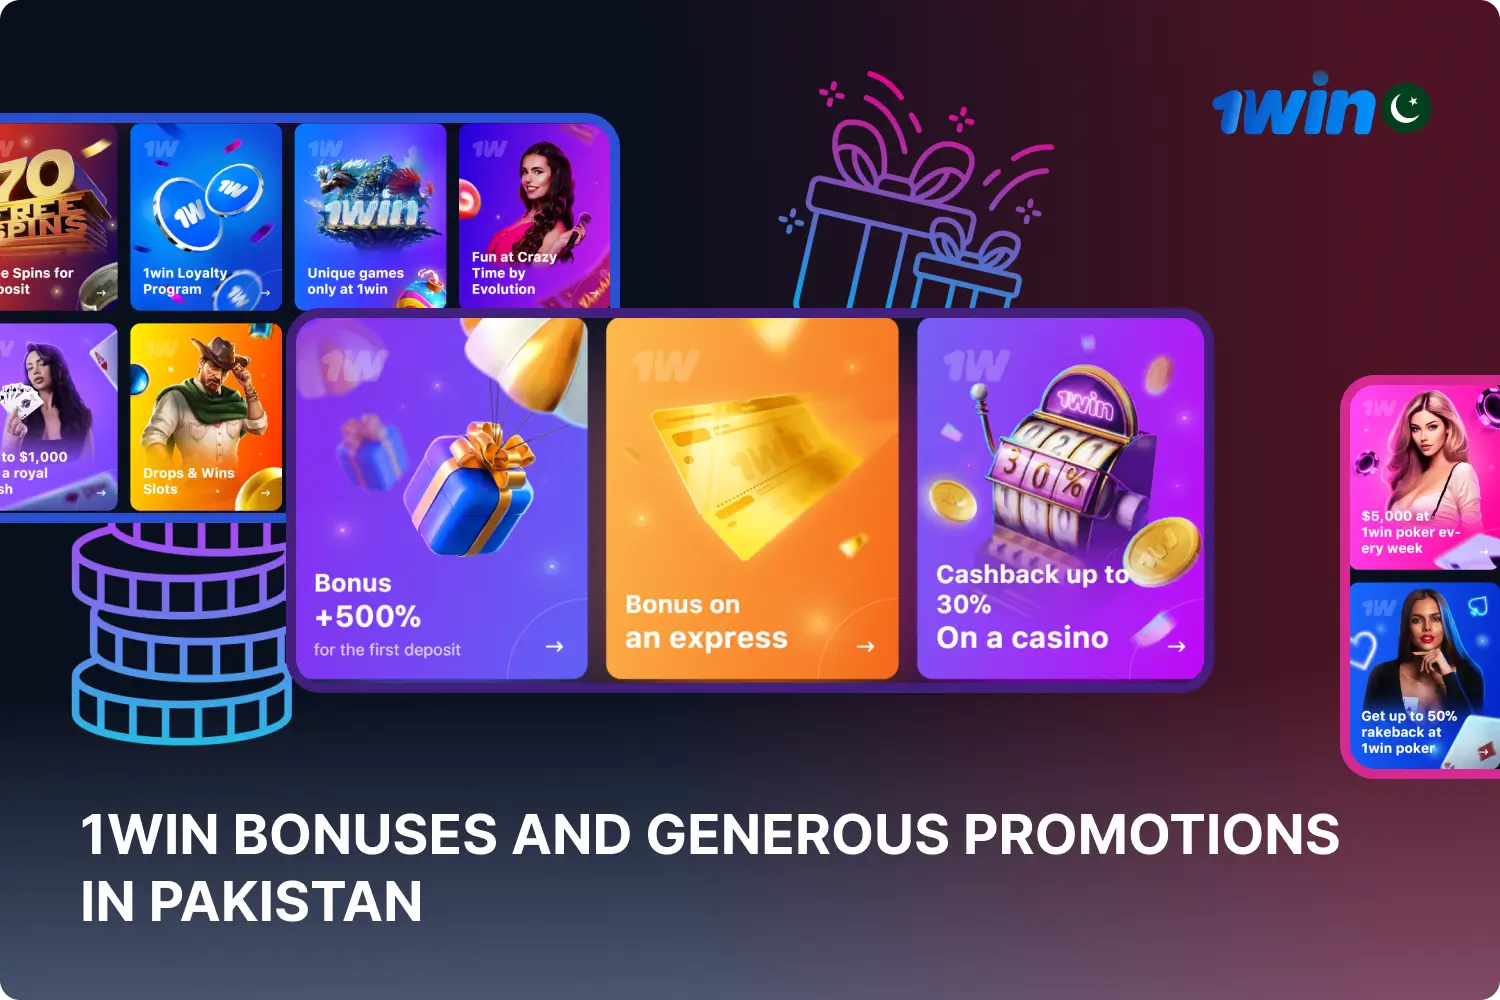 A variety of bonuses and promotional offers are available to Pakistani 1win players on the website and mobile application